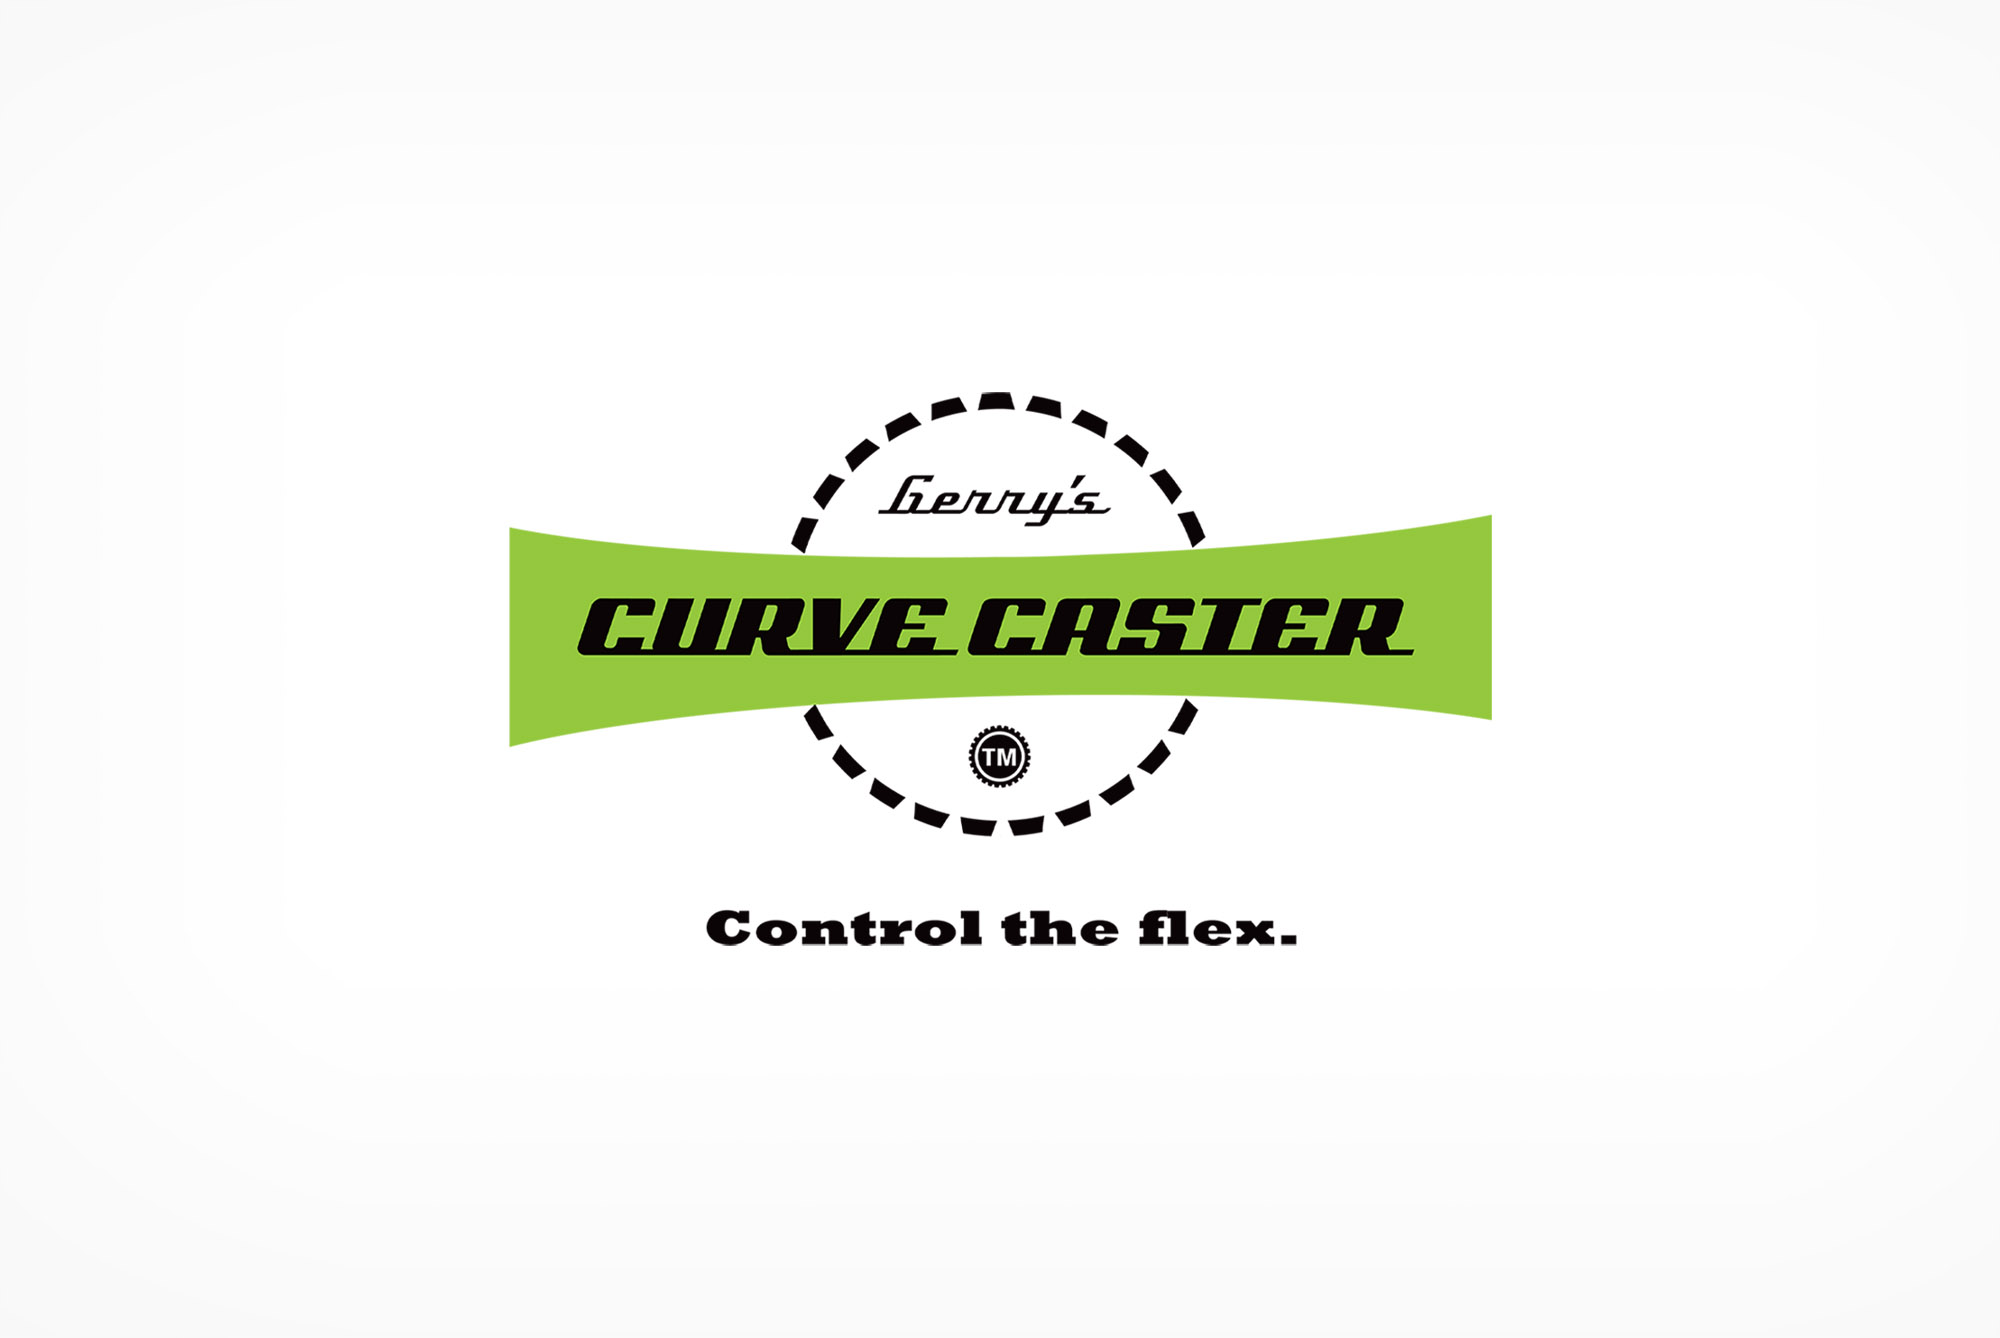 Brand logo for Gerry's Curvecaster - An autobdy tool.